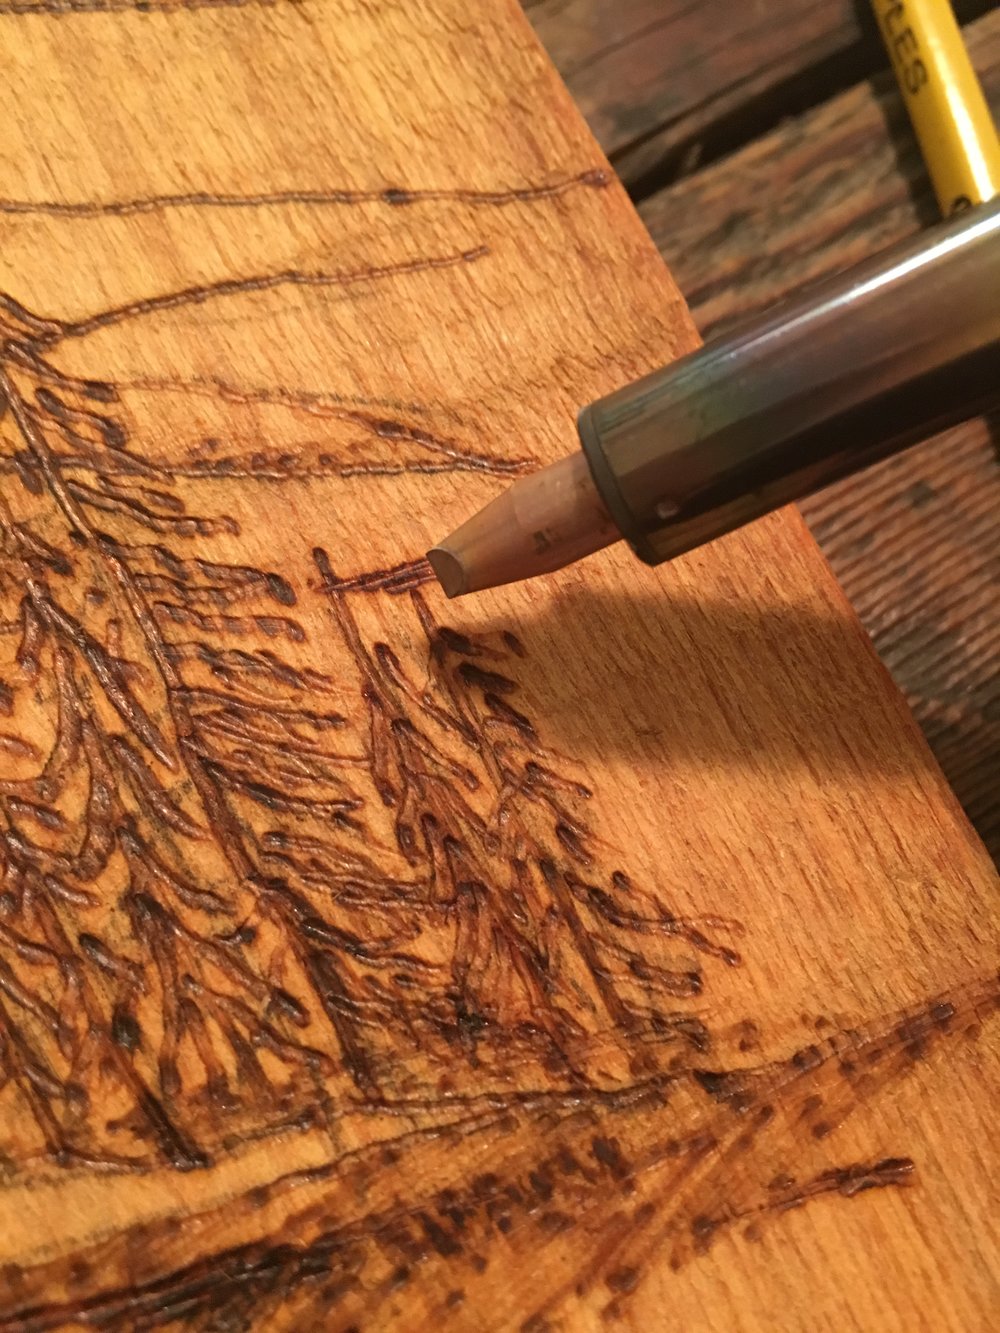 Wood Burning Ideas For Dedicated And Curious DIY Woodworkers